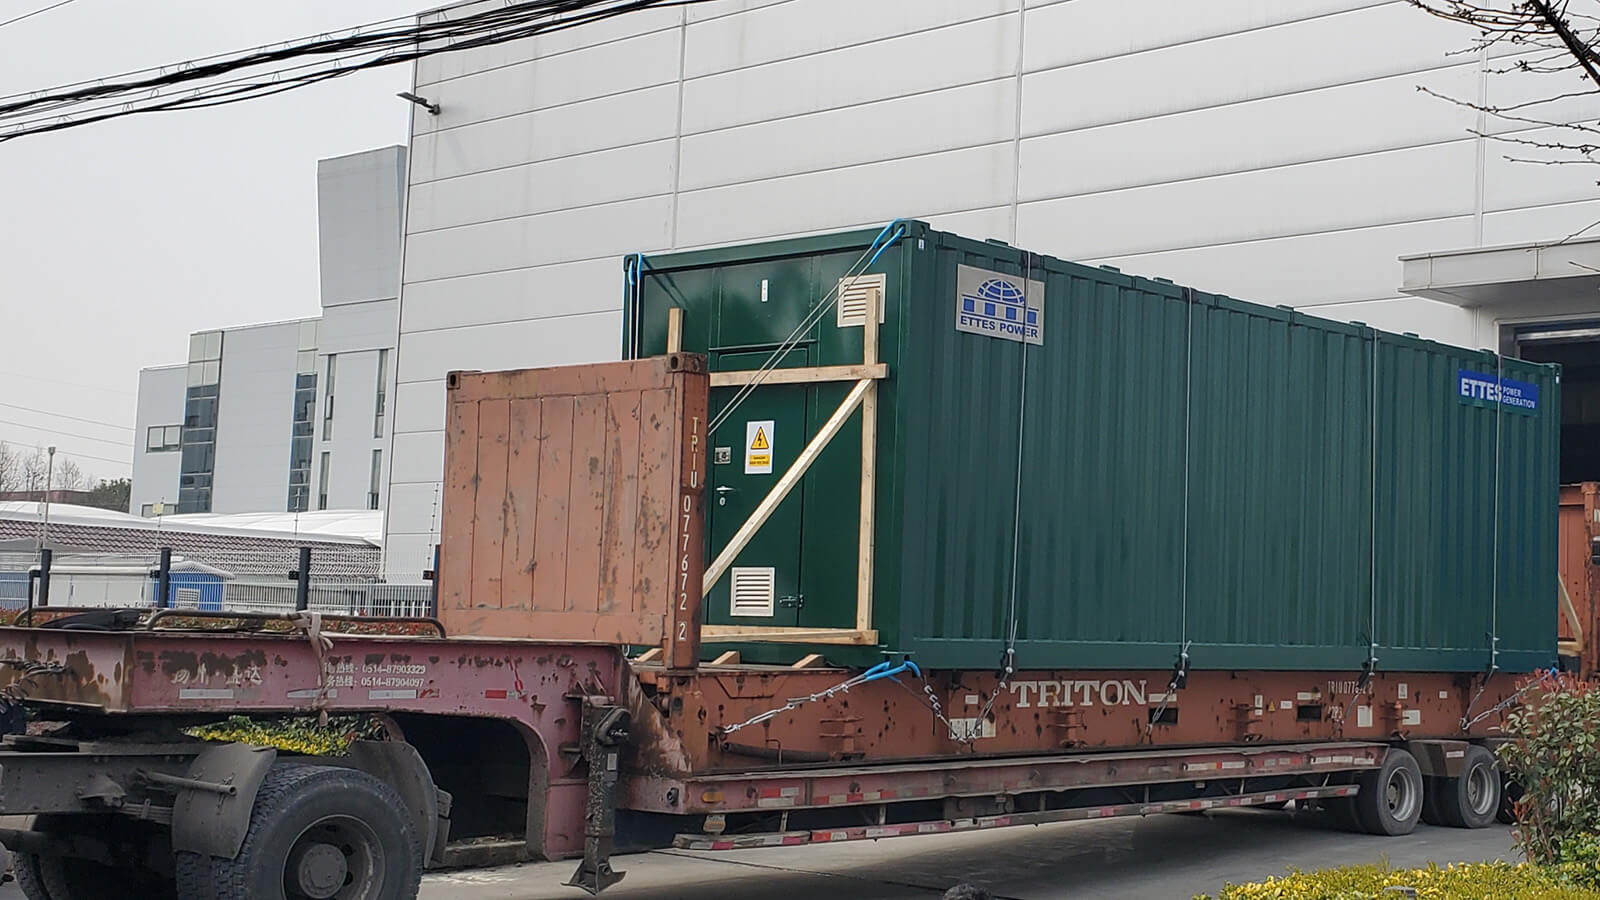 MAN Biogas Generator & CHPs are Transported to the Port in a Frame Container ETTES POWER